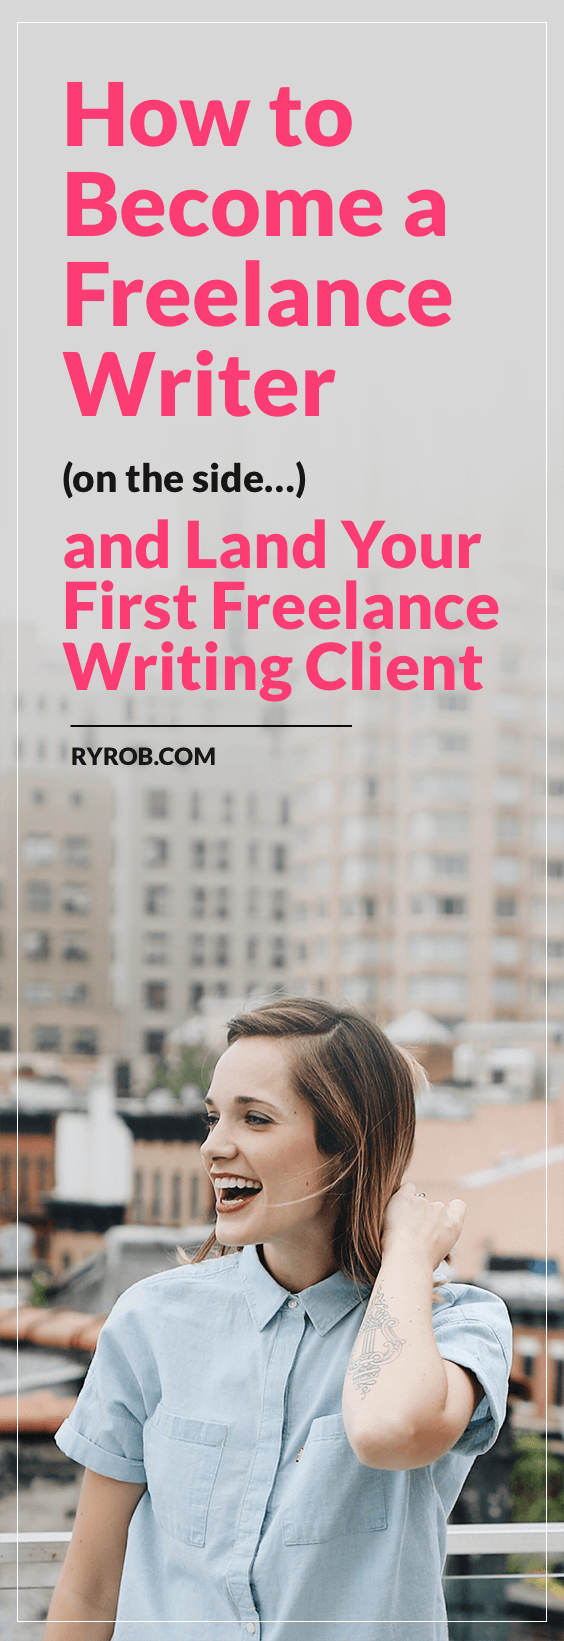 Let's talk about how to become a freelance writer on the side of your day job. I went from 0 to $160,000 as a freelance writer on the side of my full-time gig in less than 1 year, and in this post I'm talking all about how I did it.